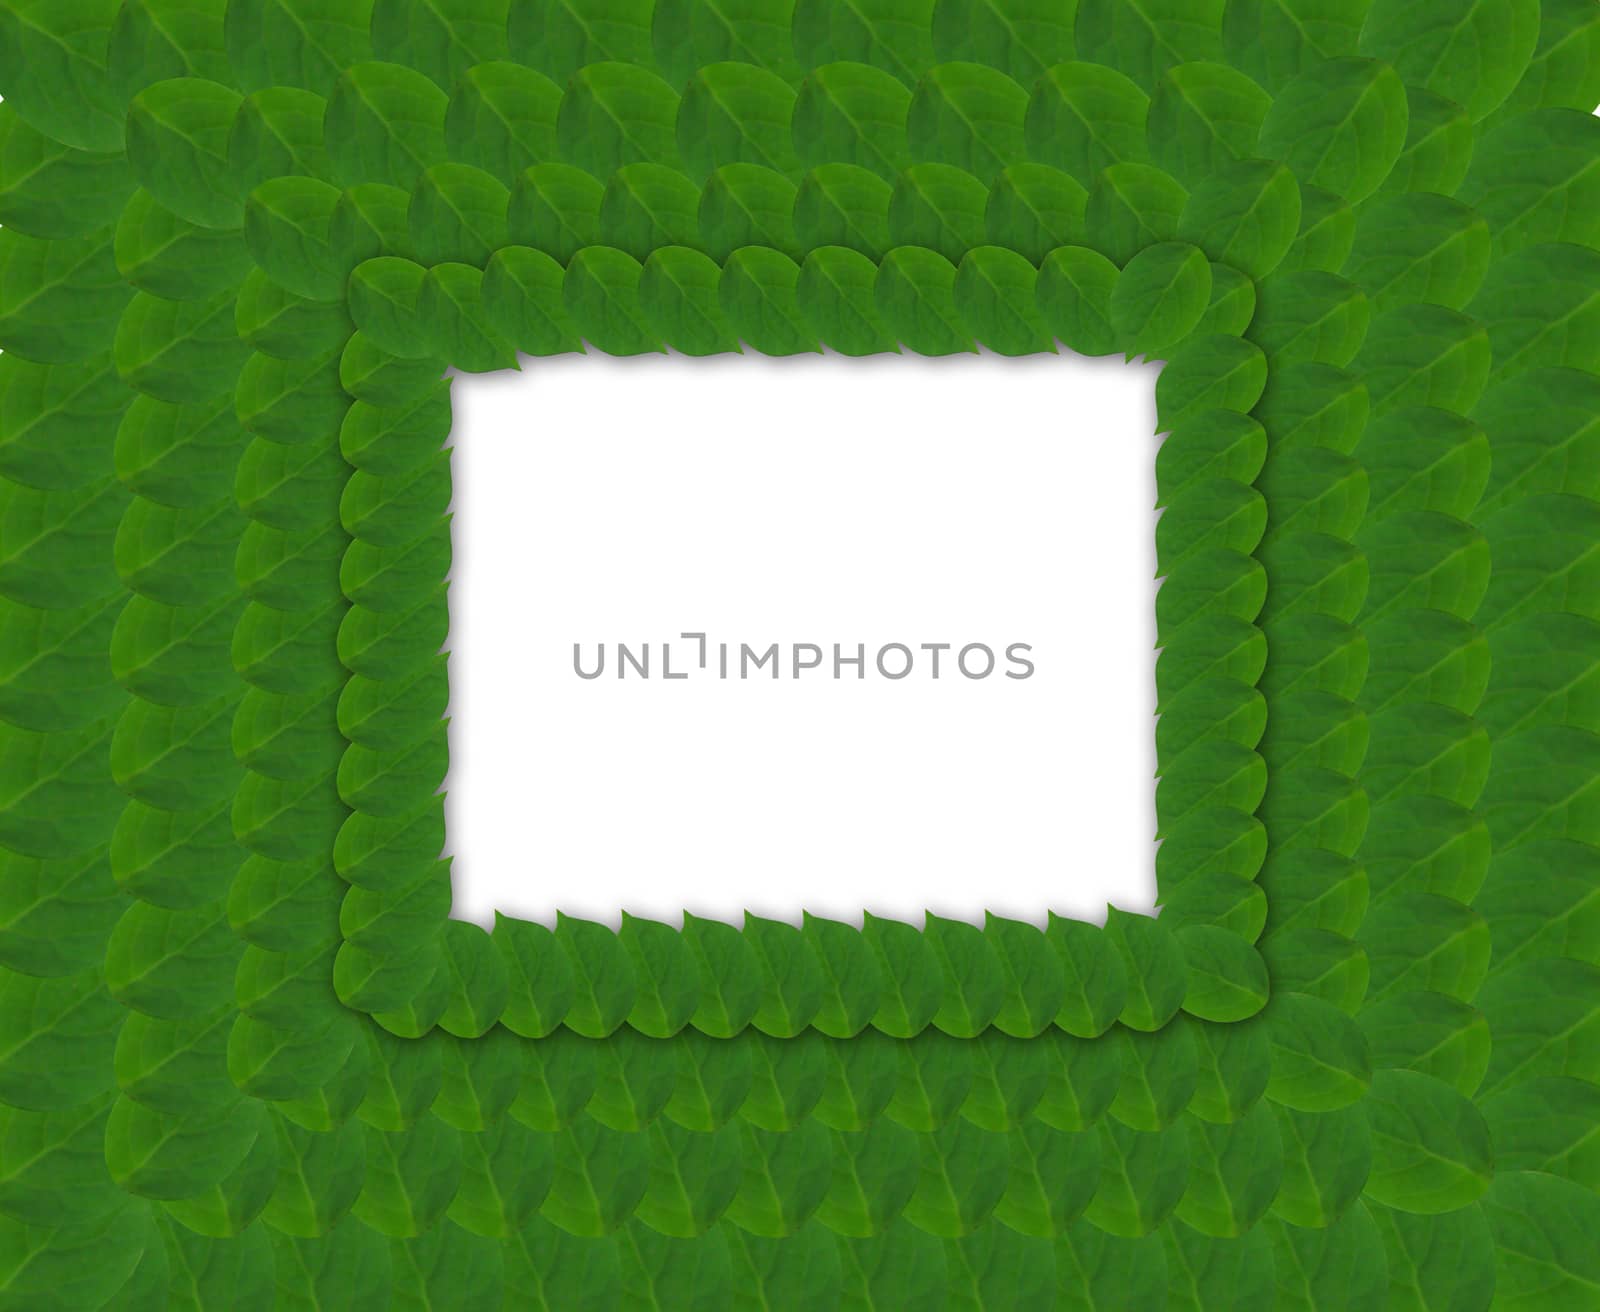 Pattern from green abstract square frame from leaves